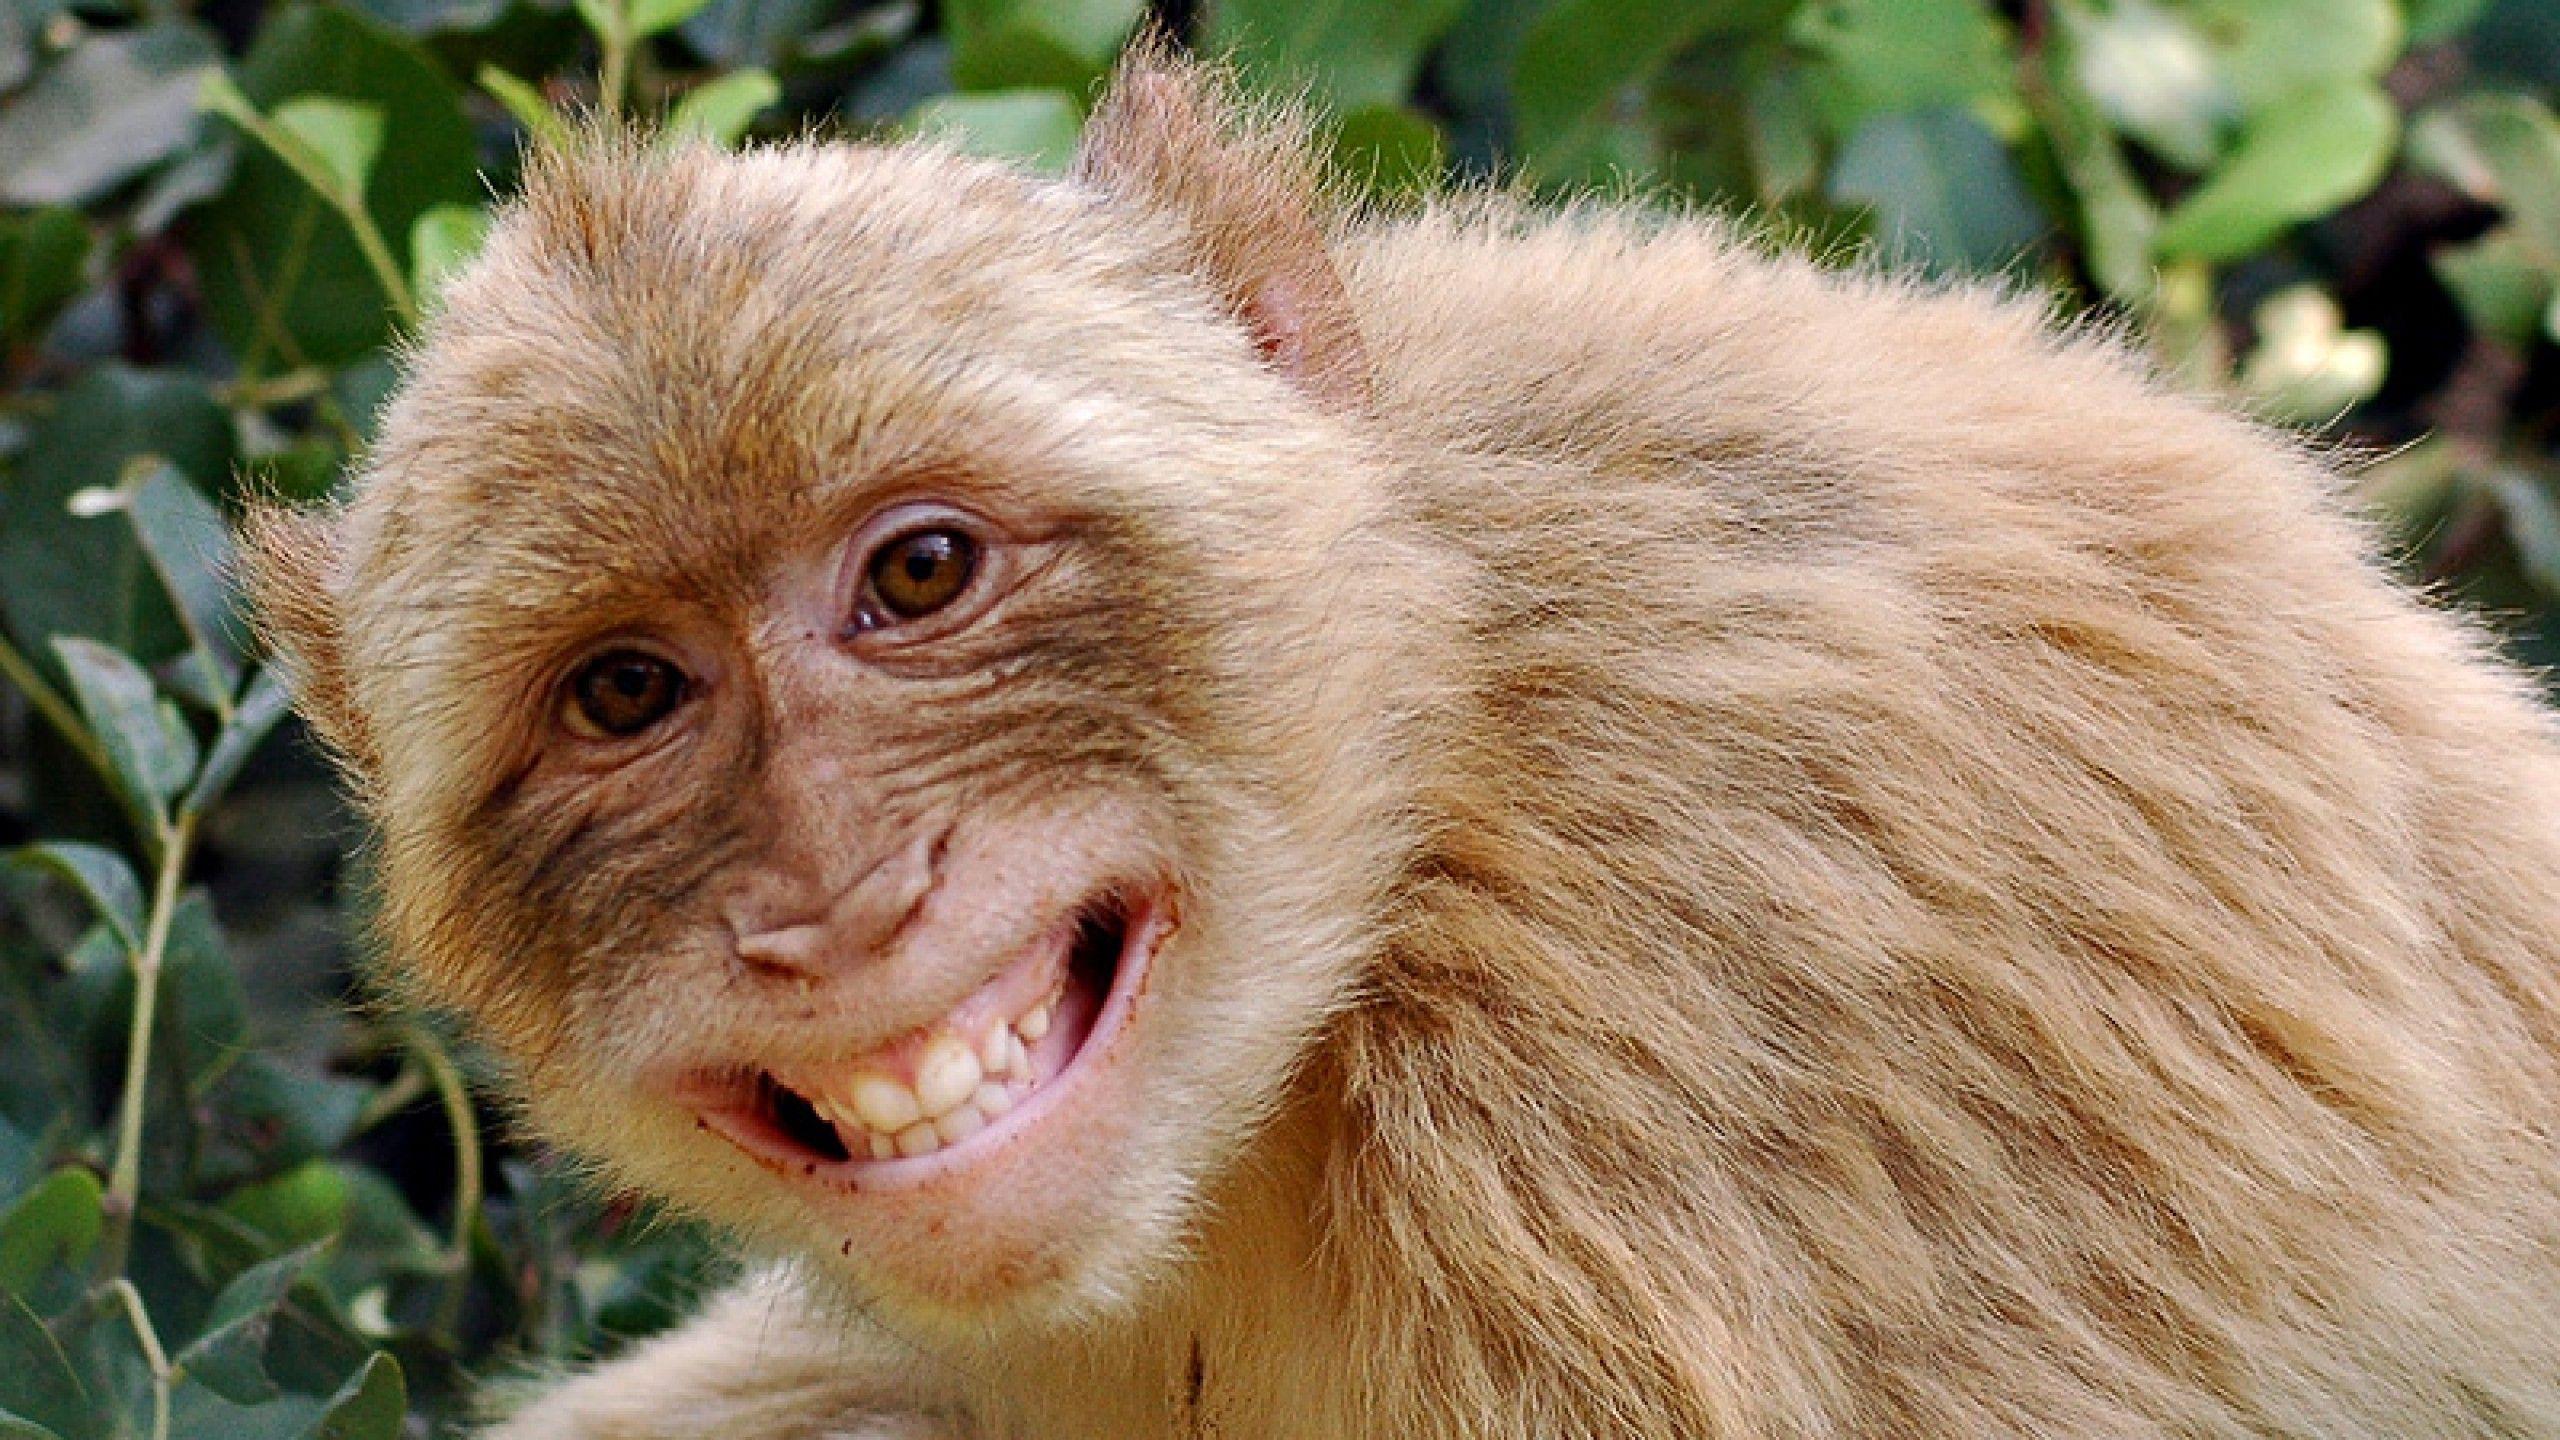 Monkey Picture Meme Background Images, HD Pictures and Wallpaper For Free  Download